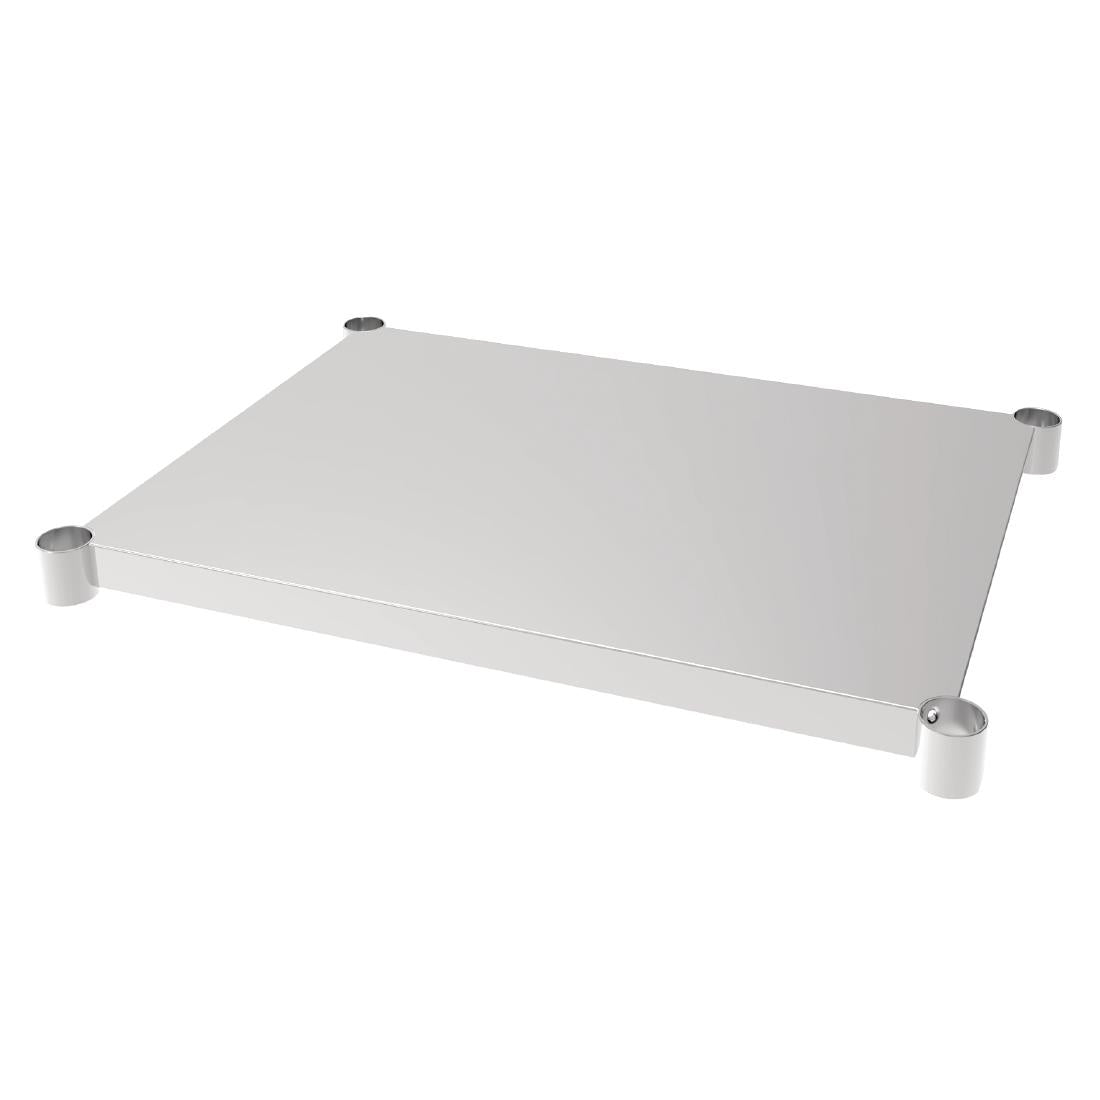 CP836 Vogue Steel Table Shelf 900x700mm JD Catering Equipment Solutions Ltd